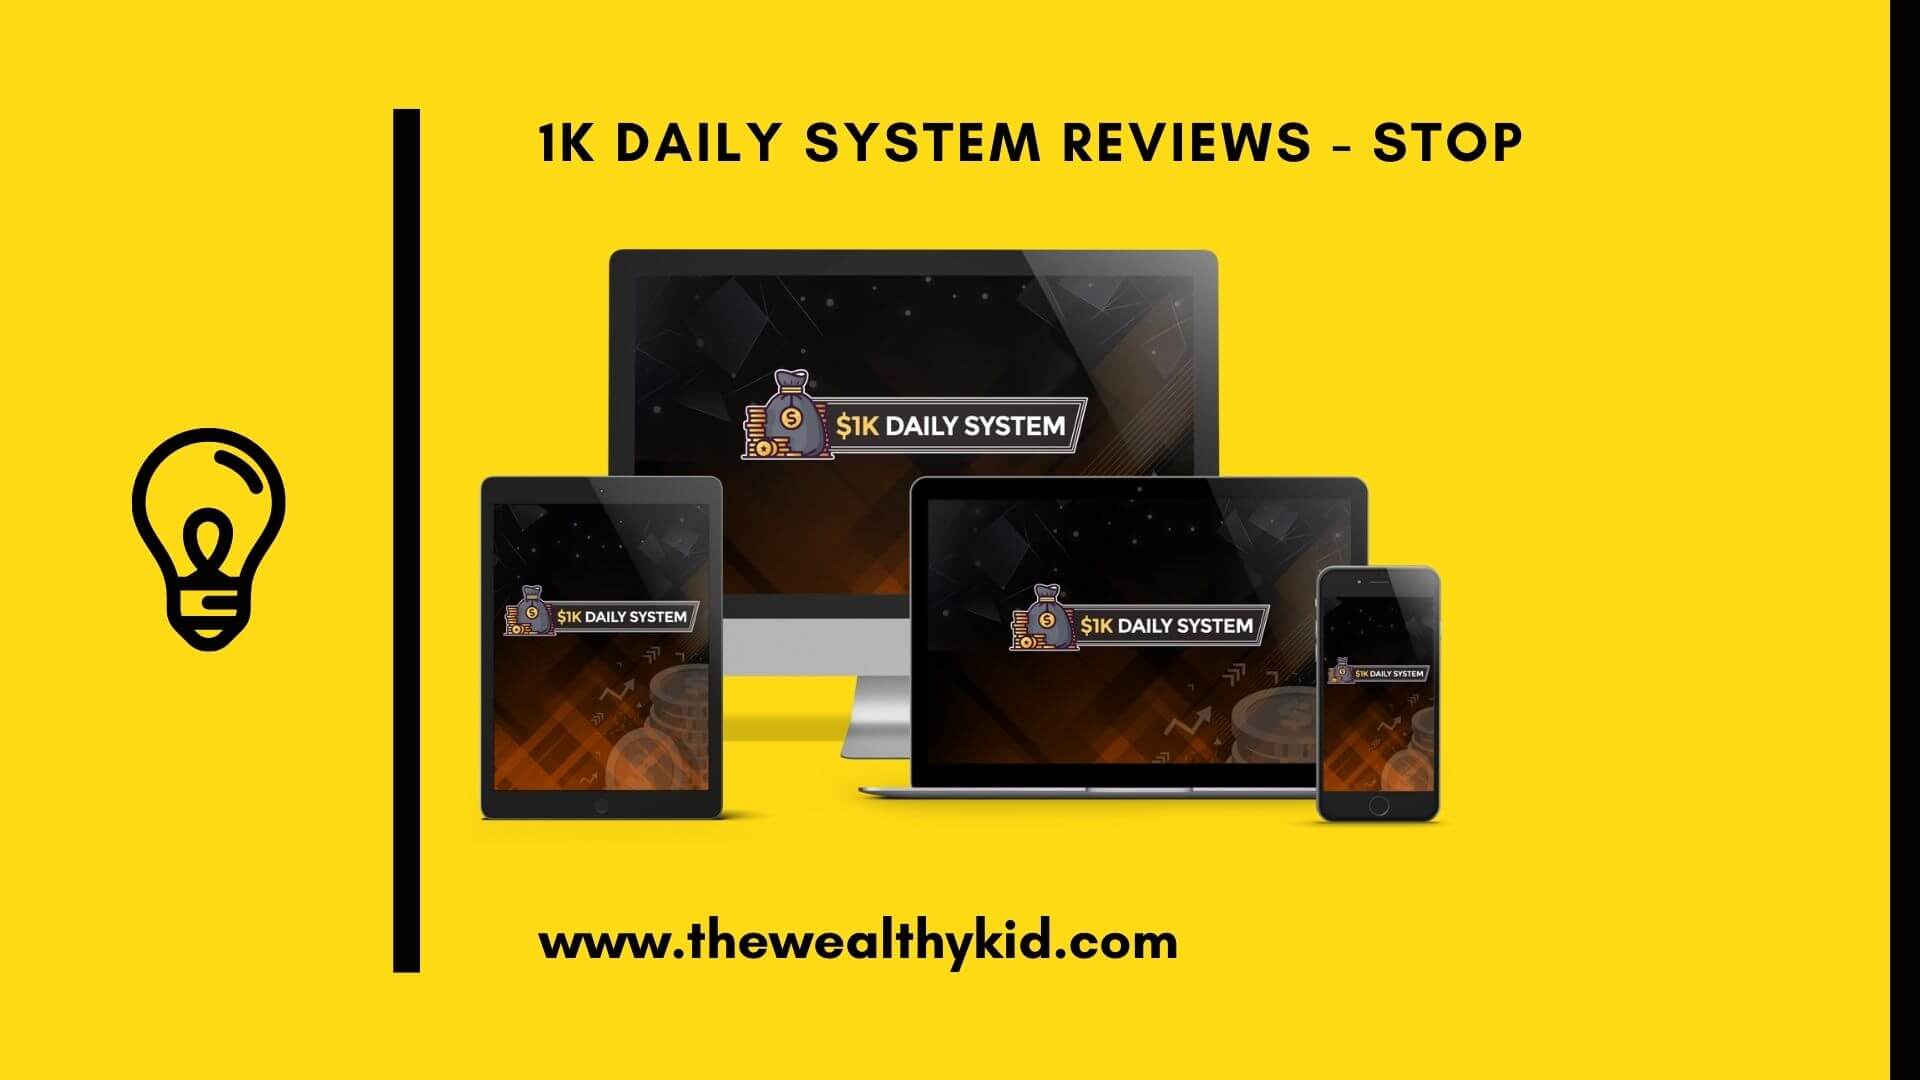 1K Daily System Review – A Waste Of Money!